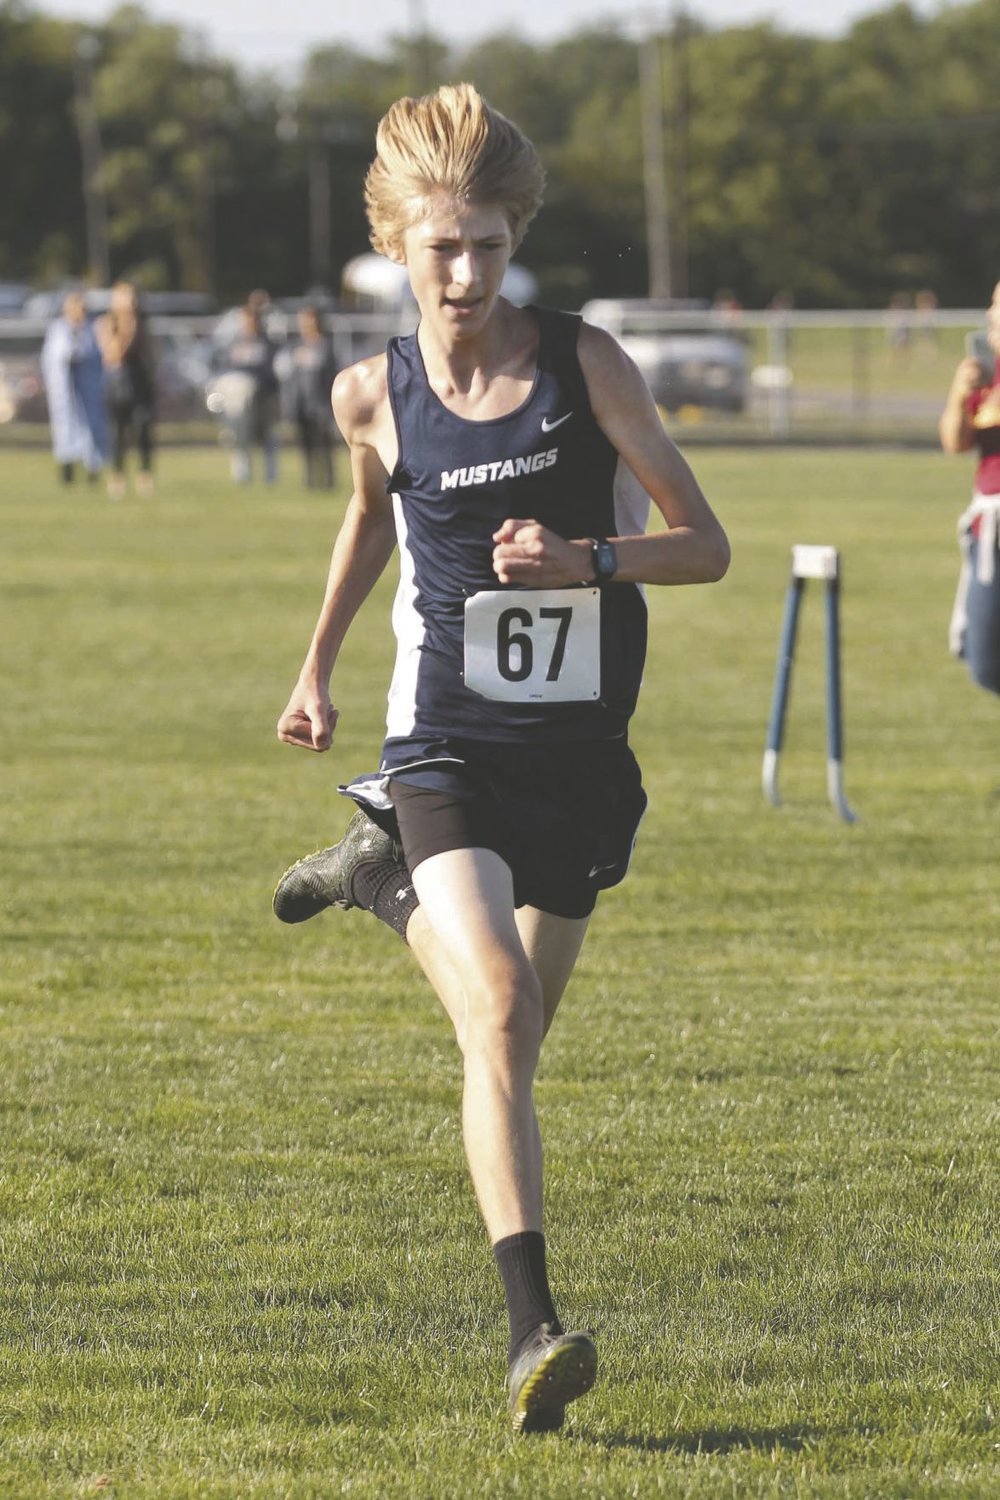 Carson Pietrzak, the top finisher for Fountain Central, was 12th in a time of 17:58.